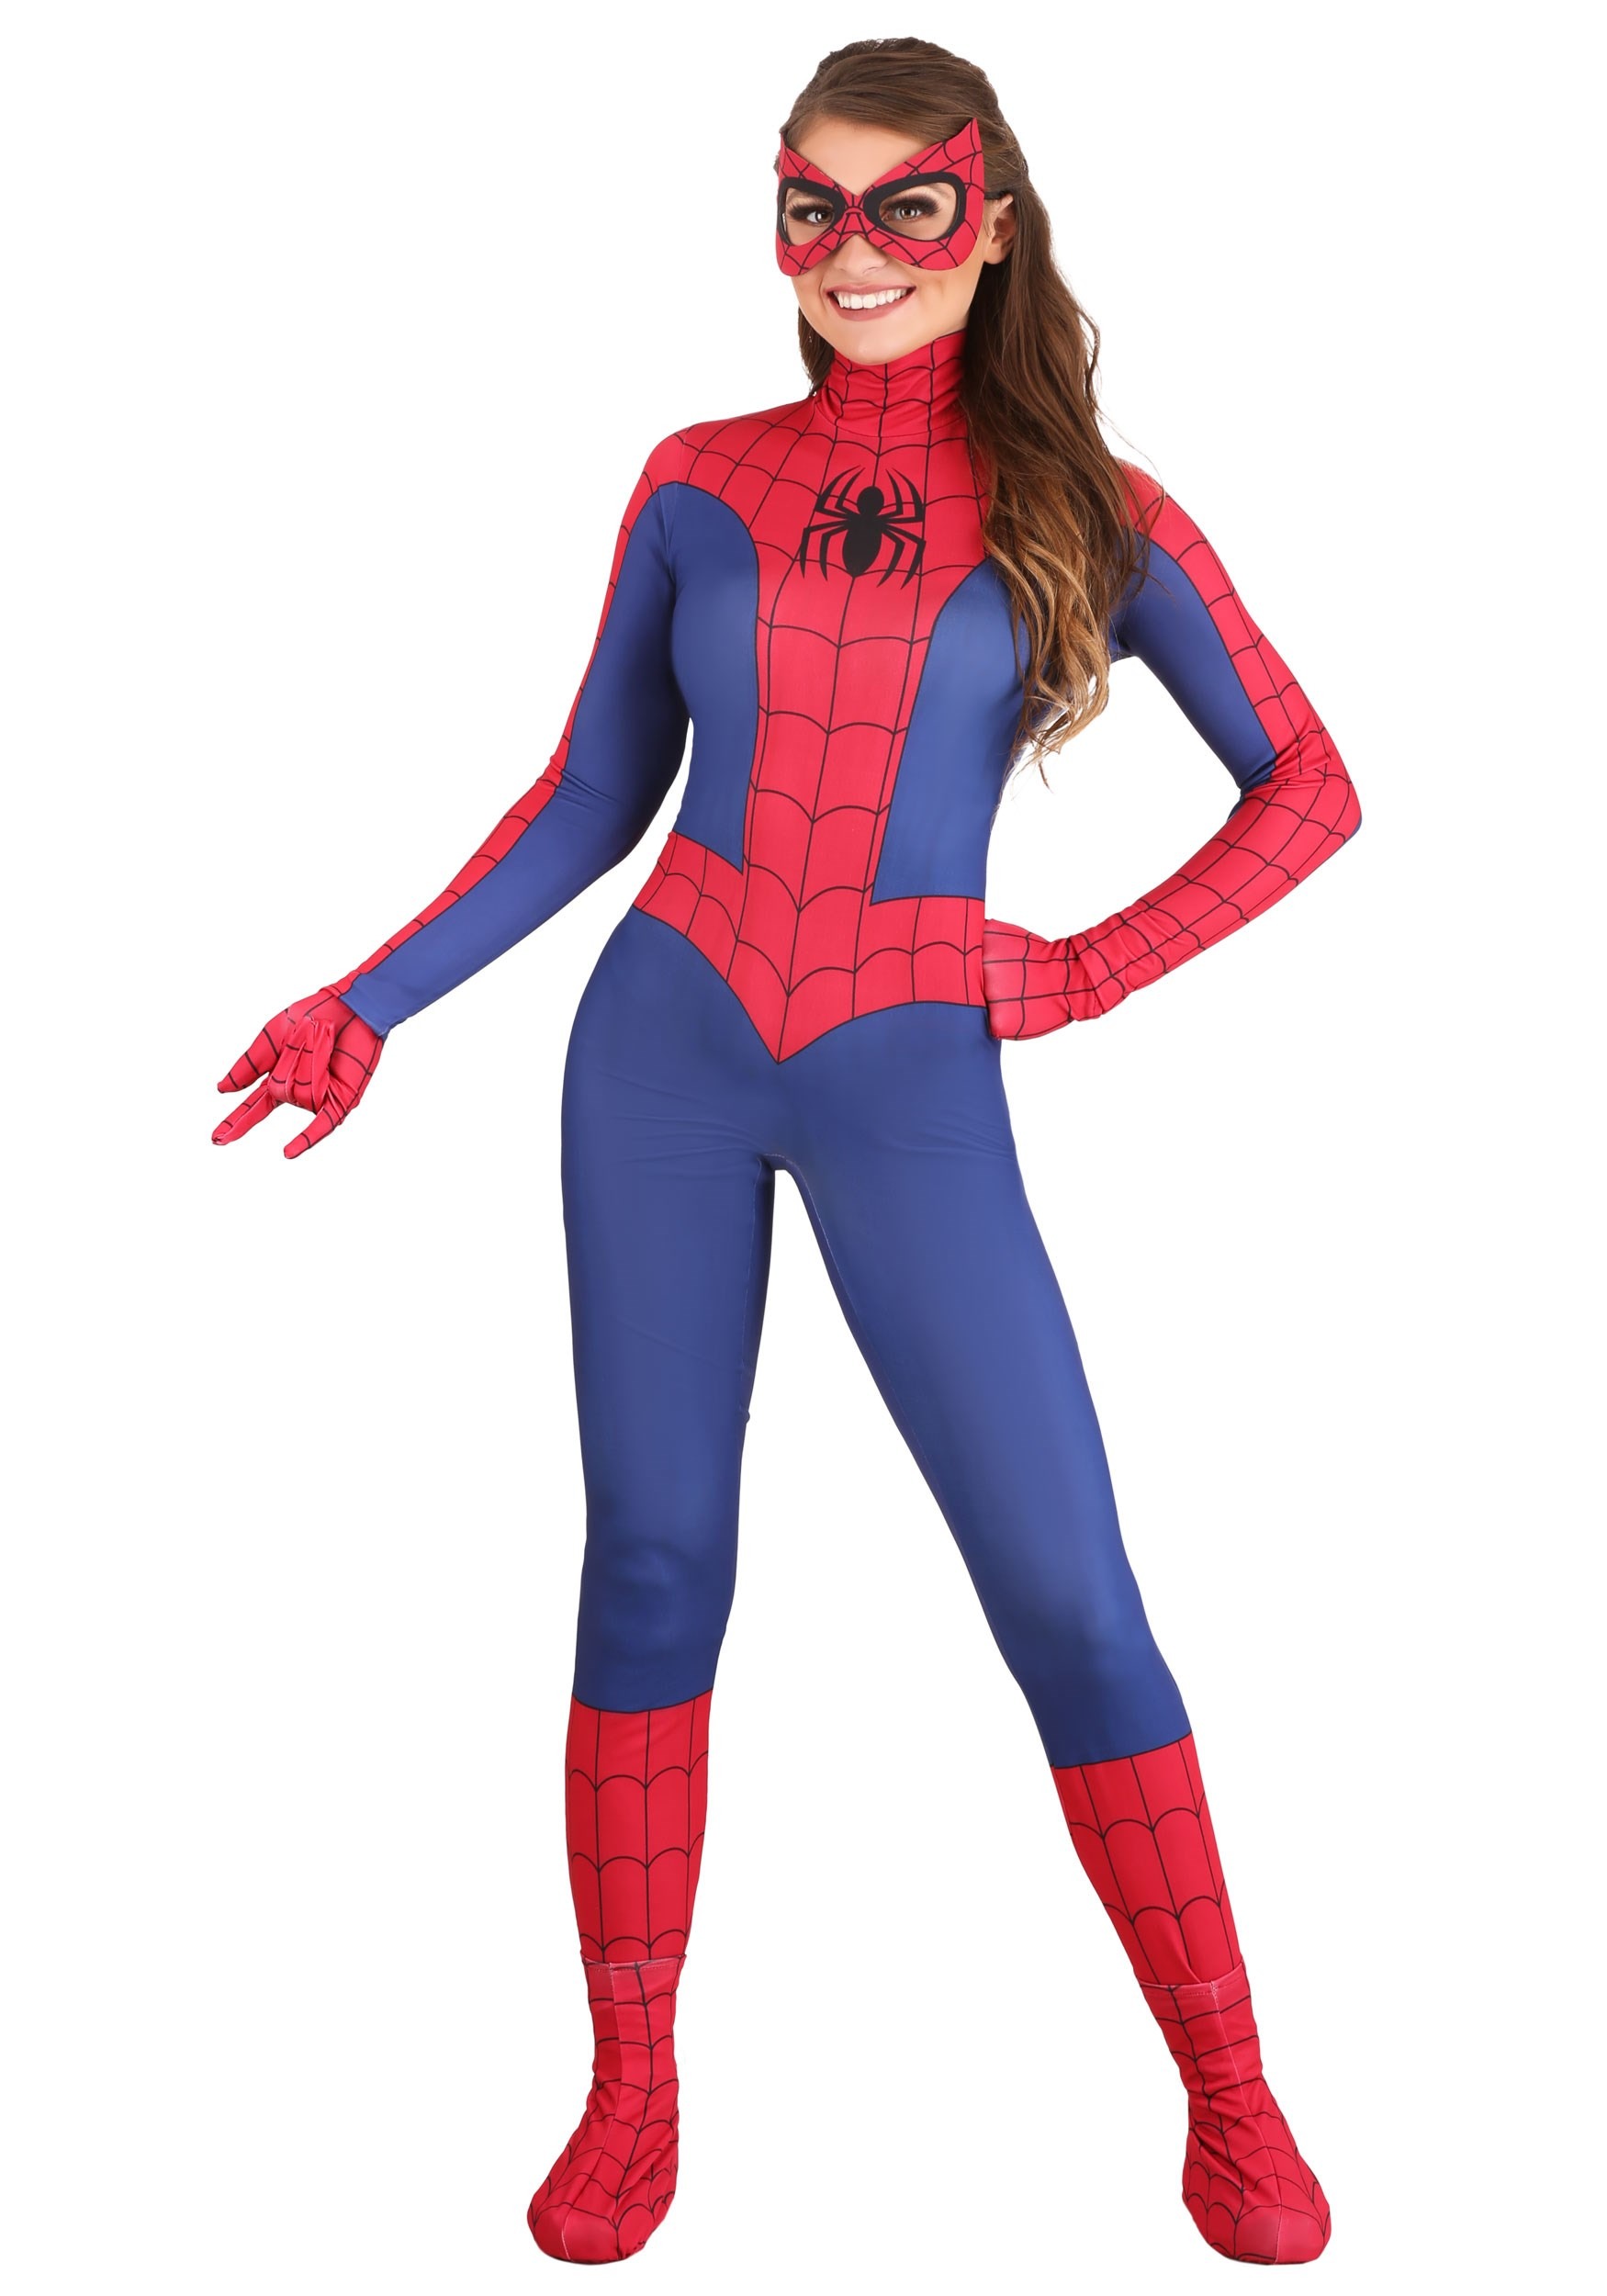 How To Make A Homemade Spiderman Costume